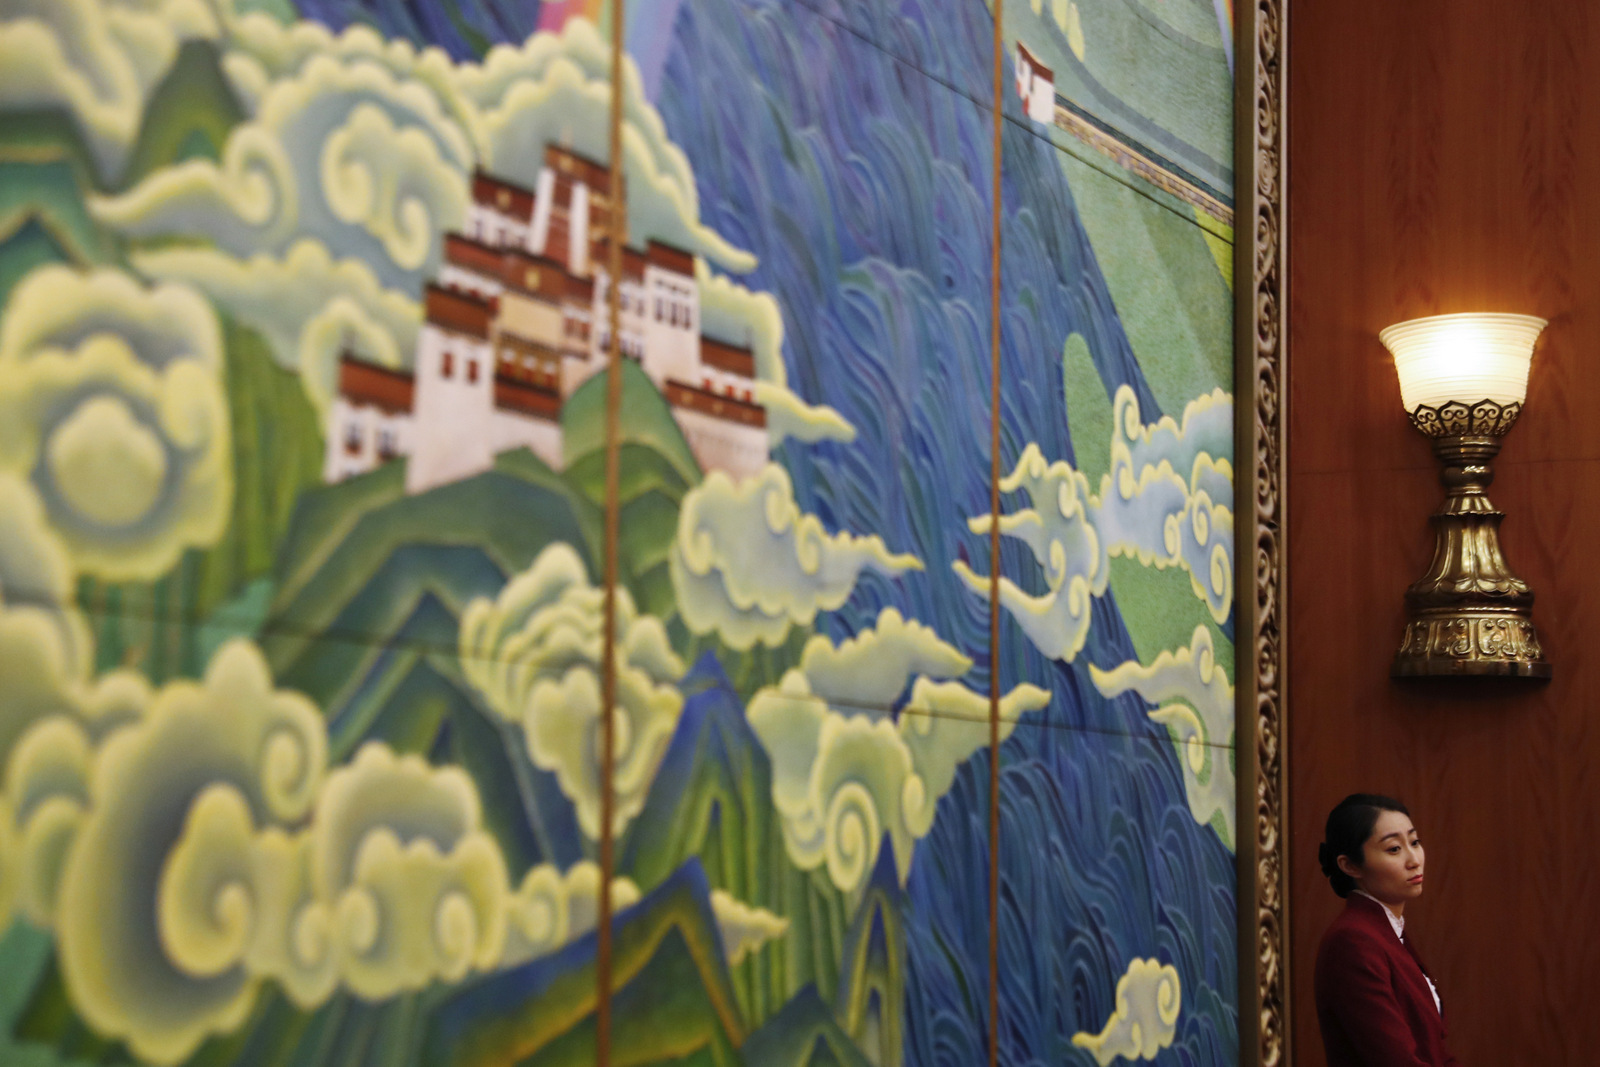 A tea hostess stands next to a mural depicting Tibet on display in the Tibet room in the Great Hall of the People during the Tibetan province delegation meeting held as part of the National People's Congress in Beijing, March 10, 2017. (AP/Andy Wong)